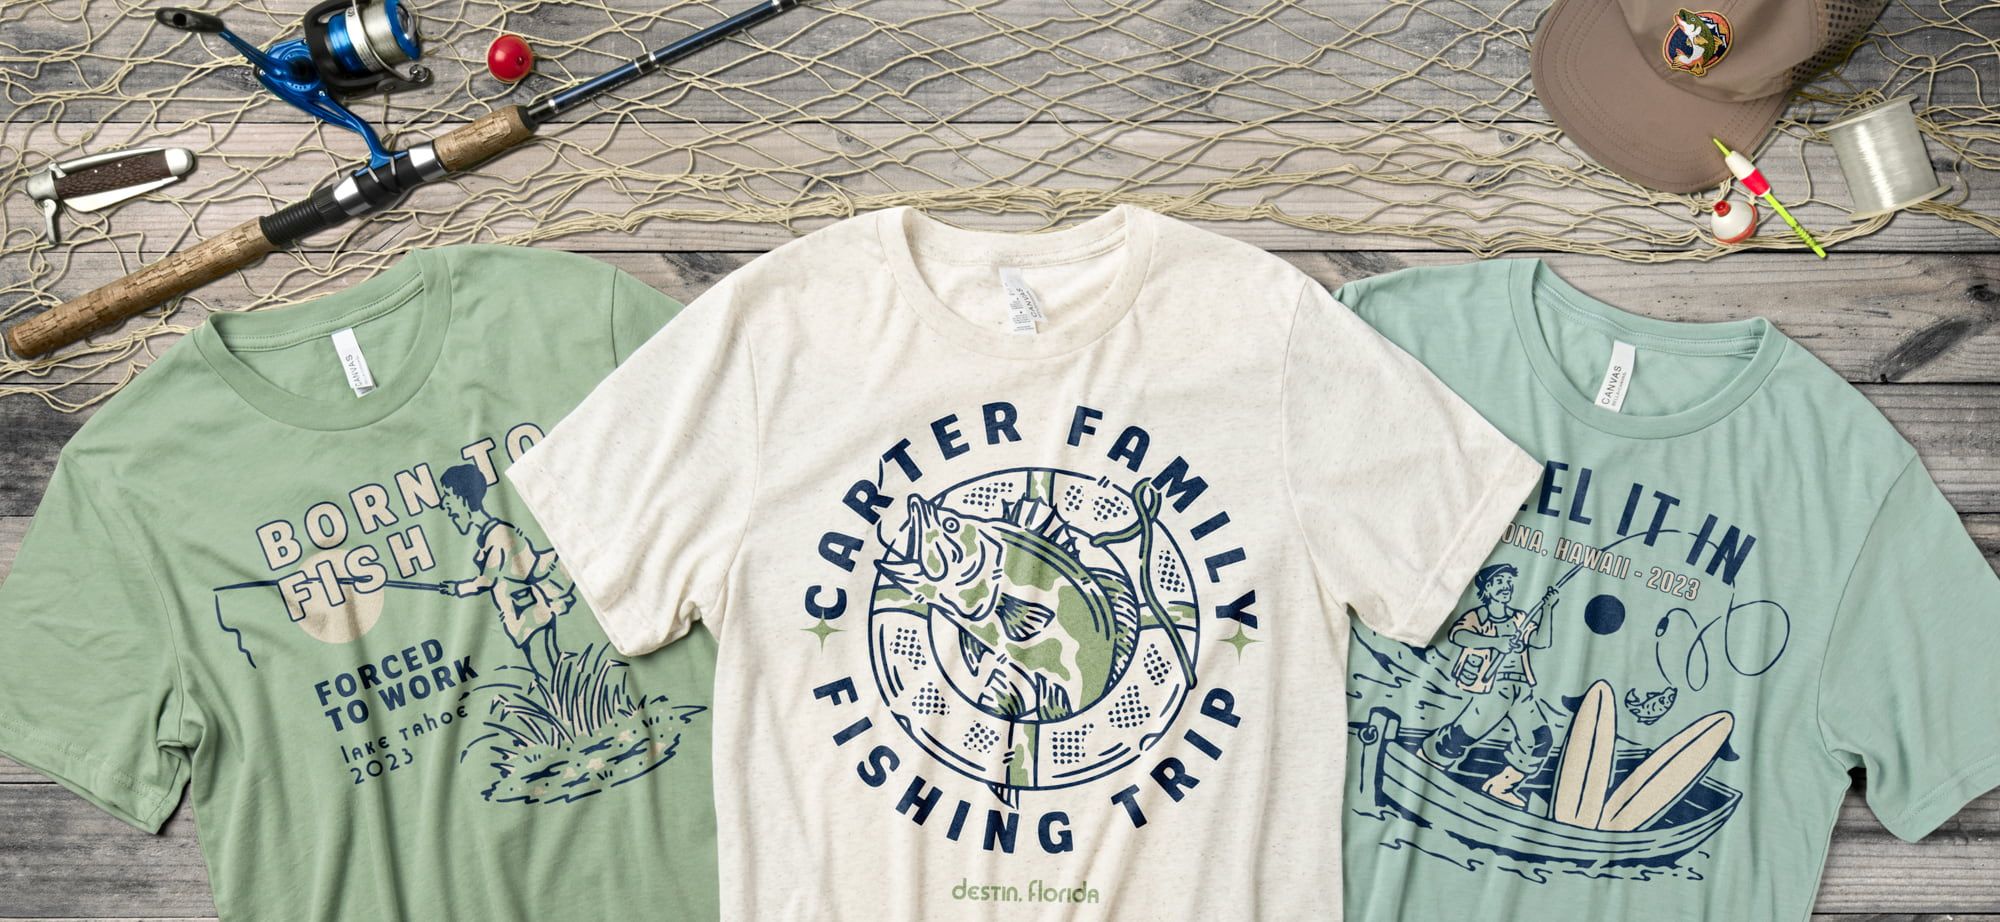 Catch of the Day: Create Unique Fishing Shirts with UberPrints